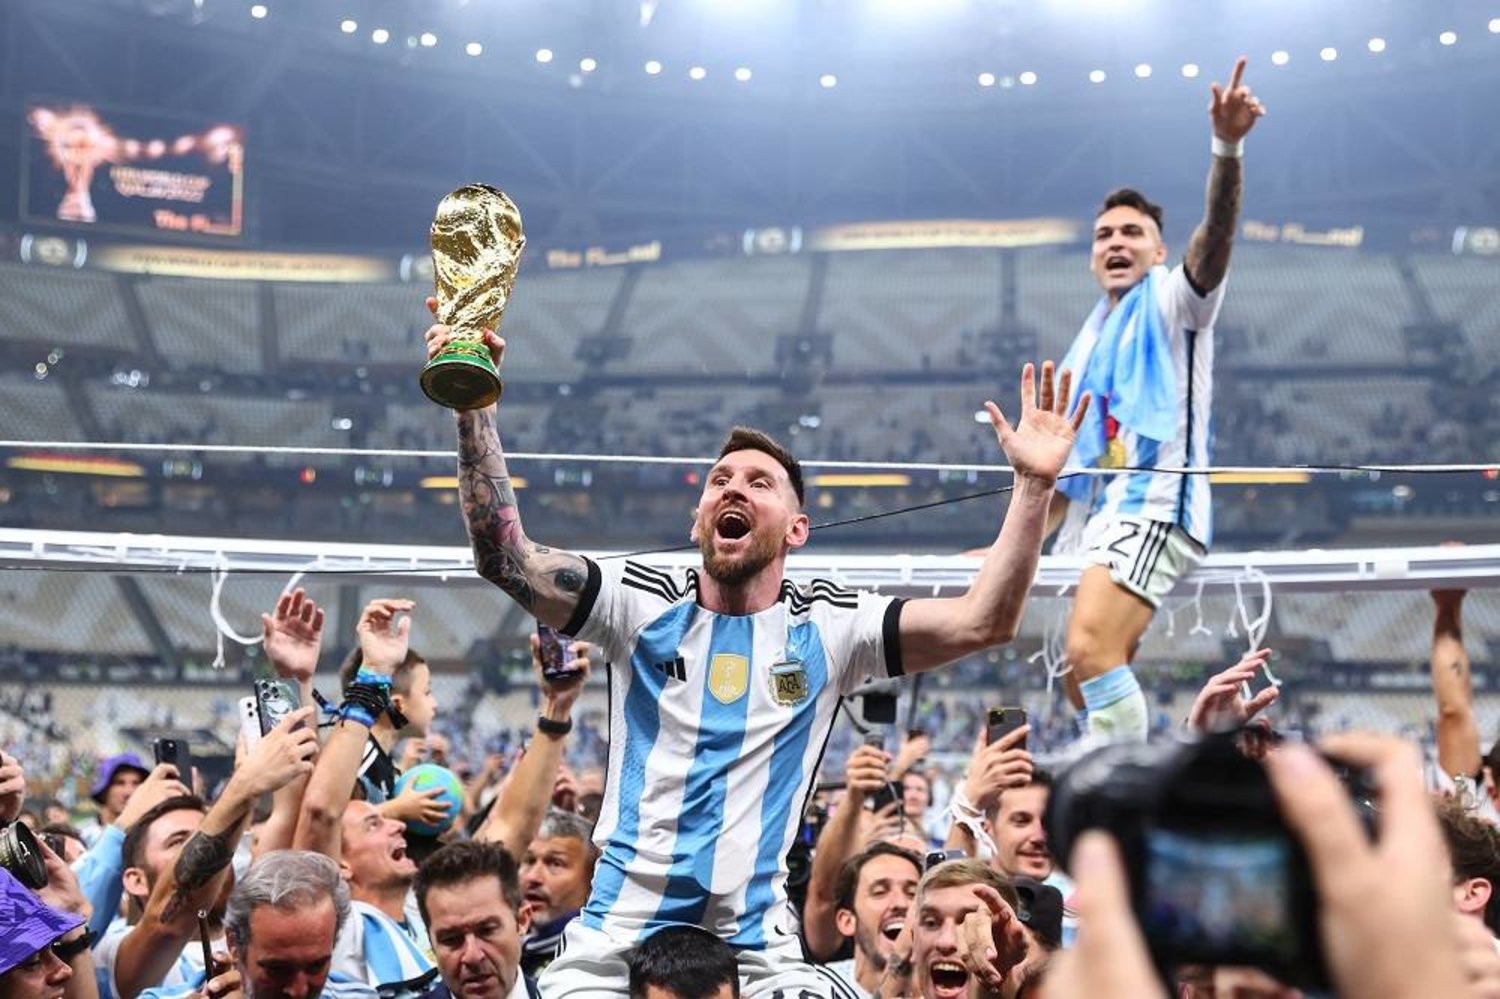 18 December 2022, Qatar, Lusail: Argentina's Lionel Messi (L) and Lautaro Martinez celebrate with the World Cup trophy after Argentina's victory in the FIFA World Cup Qatar 2022 final soccer match against France at the Lusail Stadium. (dpa)